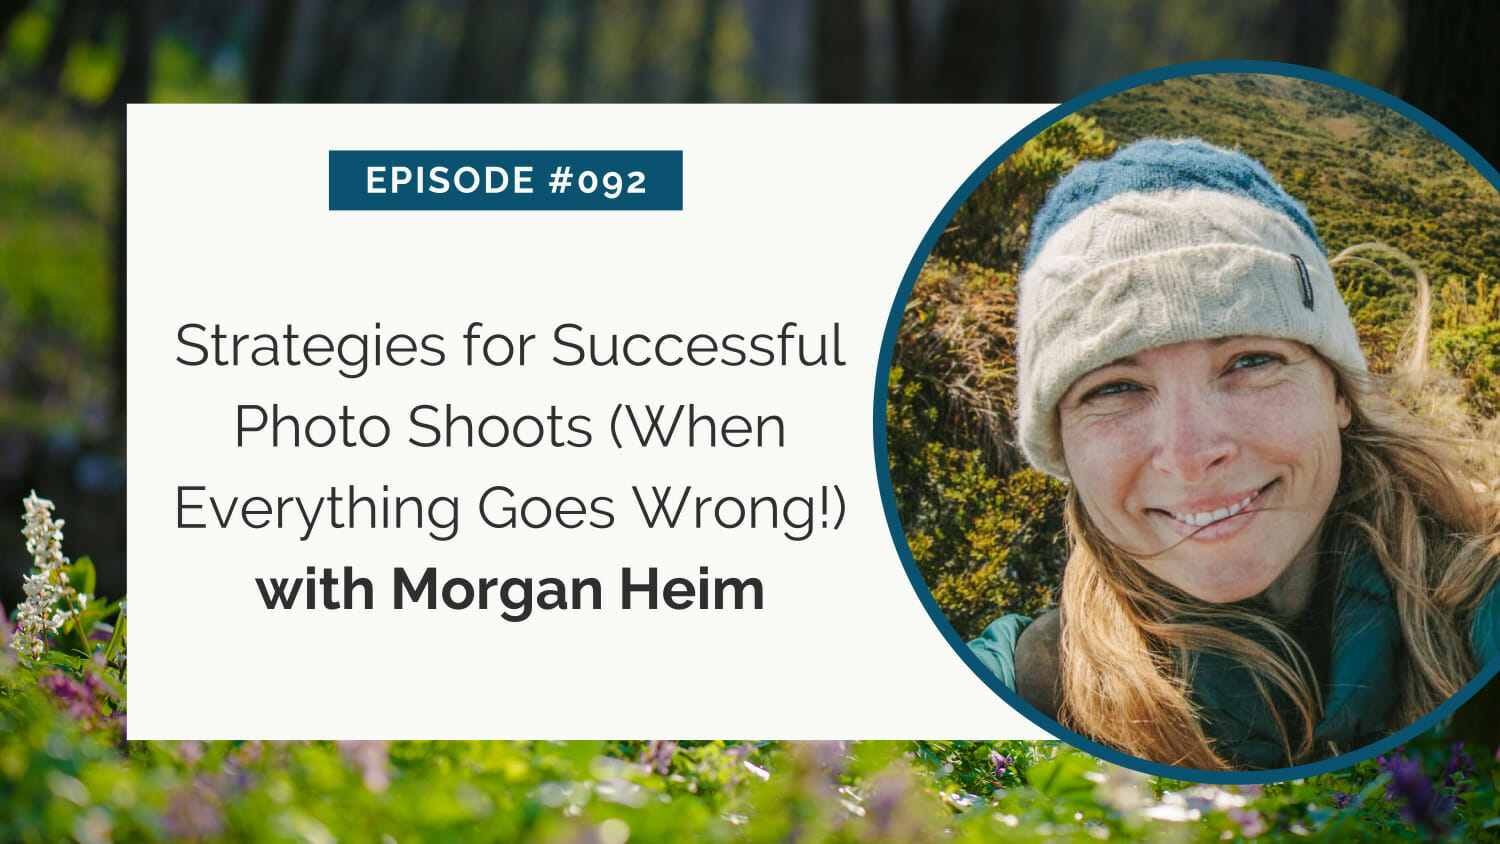 Promotional graphic for episode #092 featuring morgan heim, discussing strategies for successful photo shoots despite challenges.